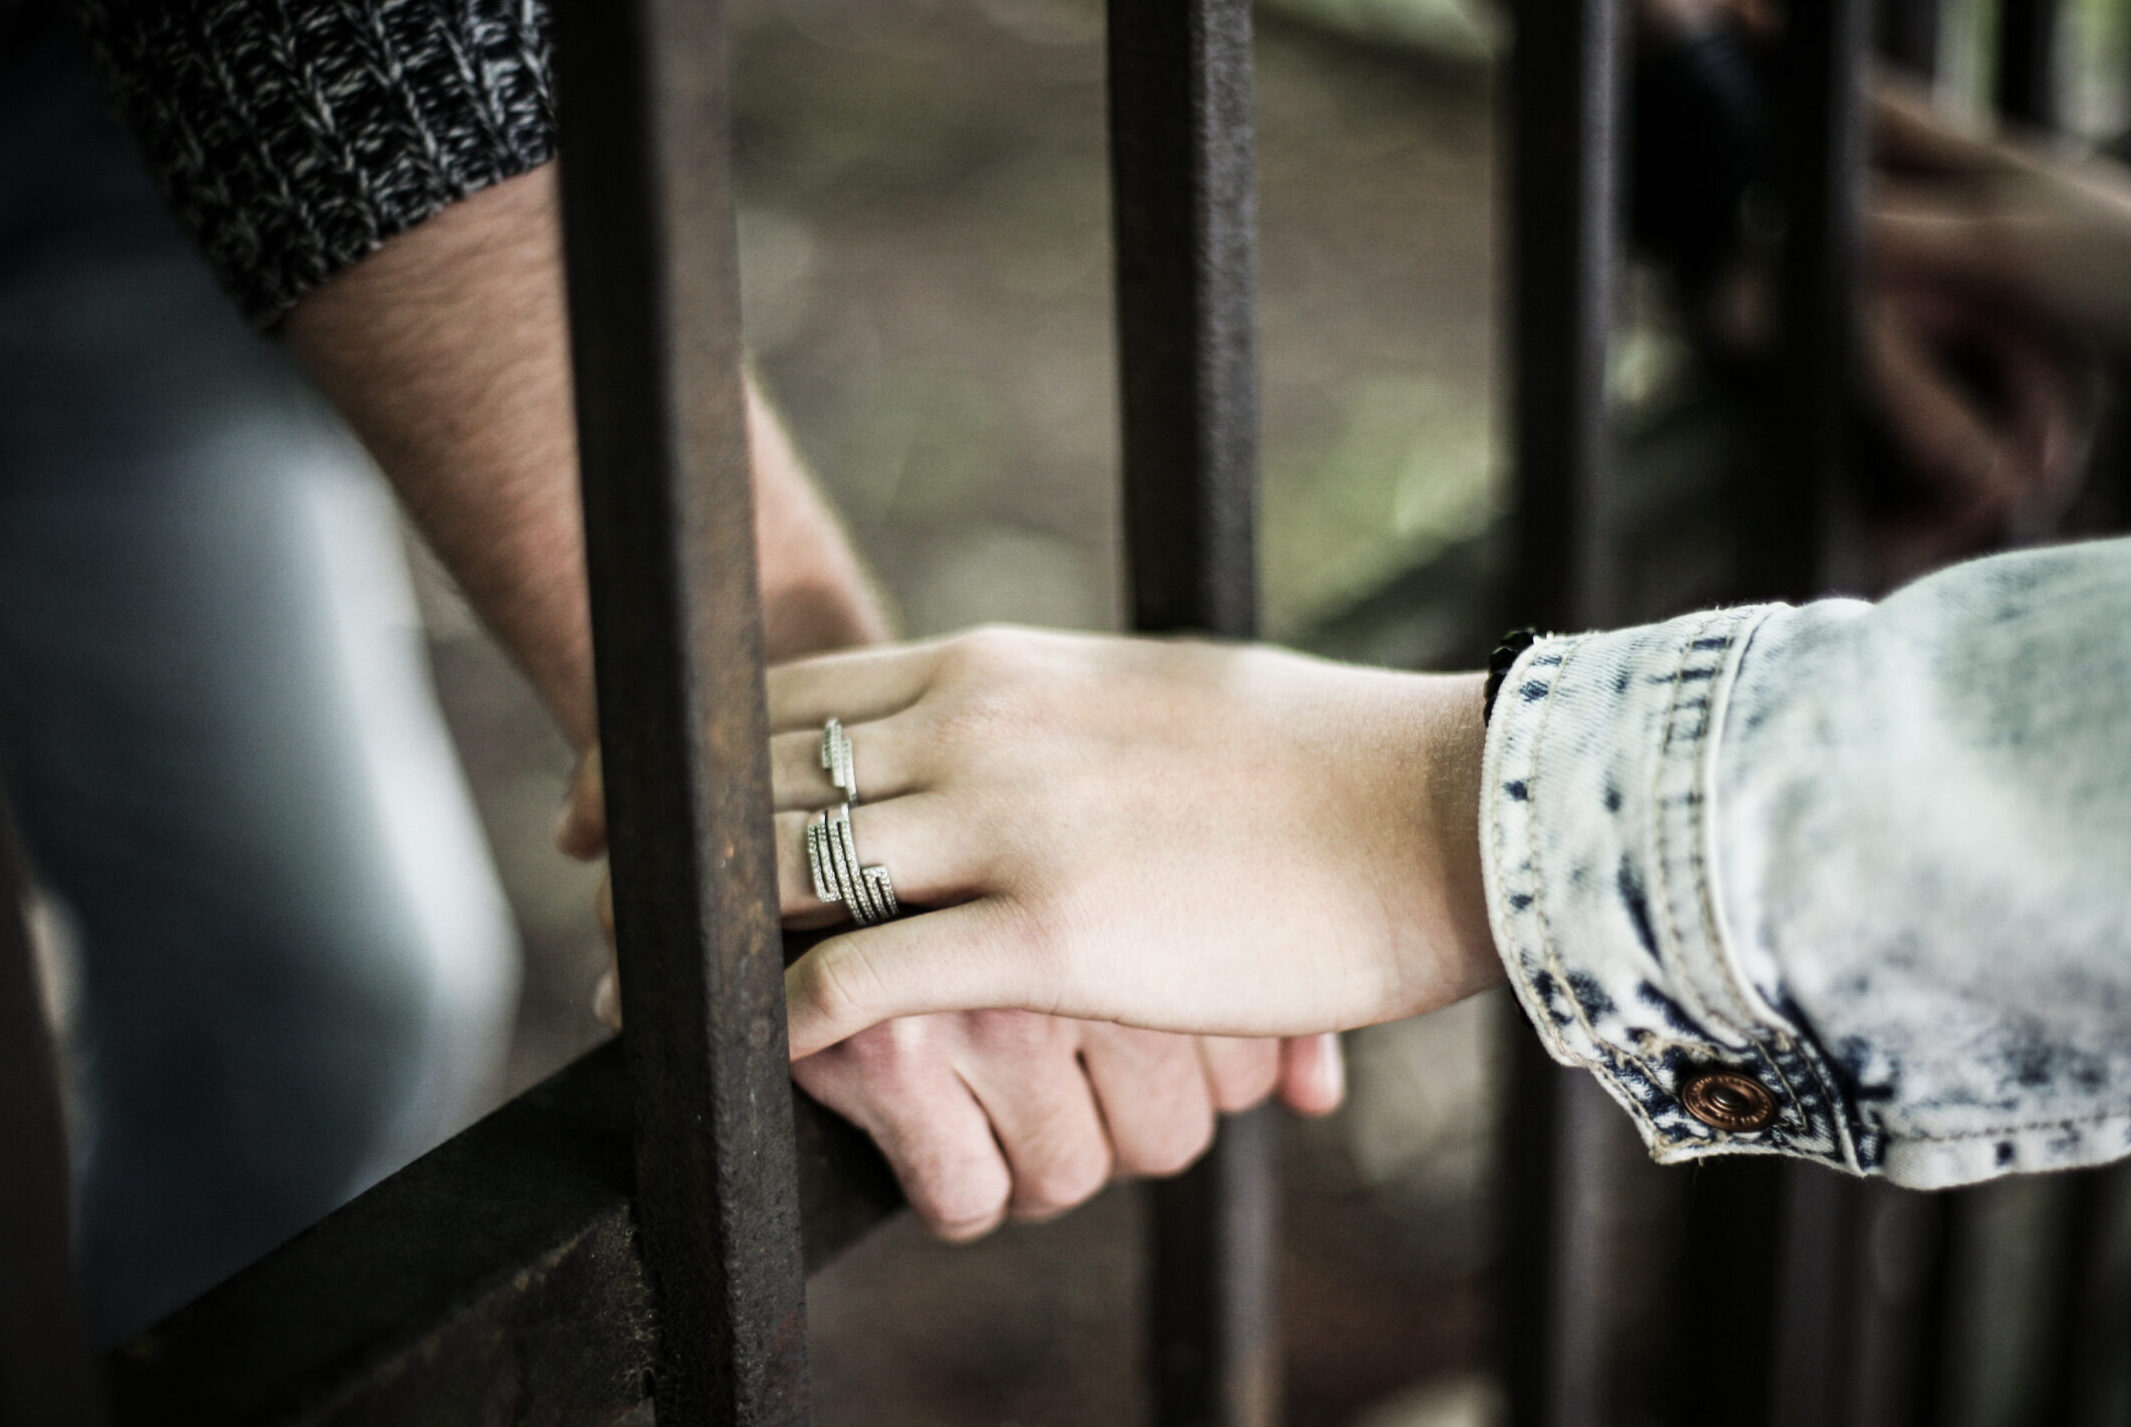 I’m pregnant and my boyfriend is in jail